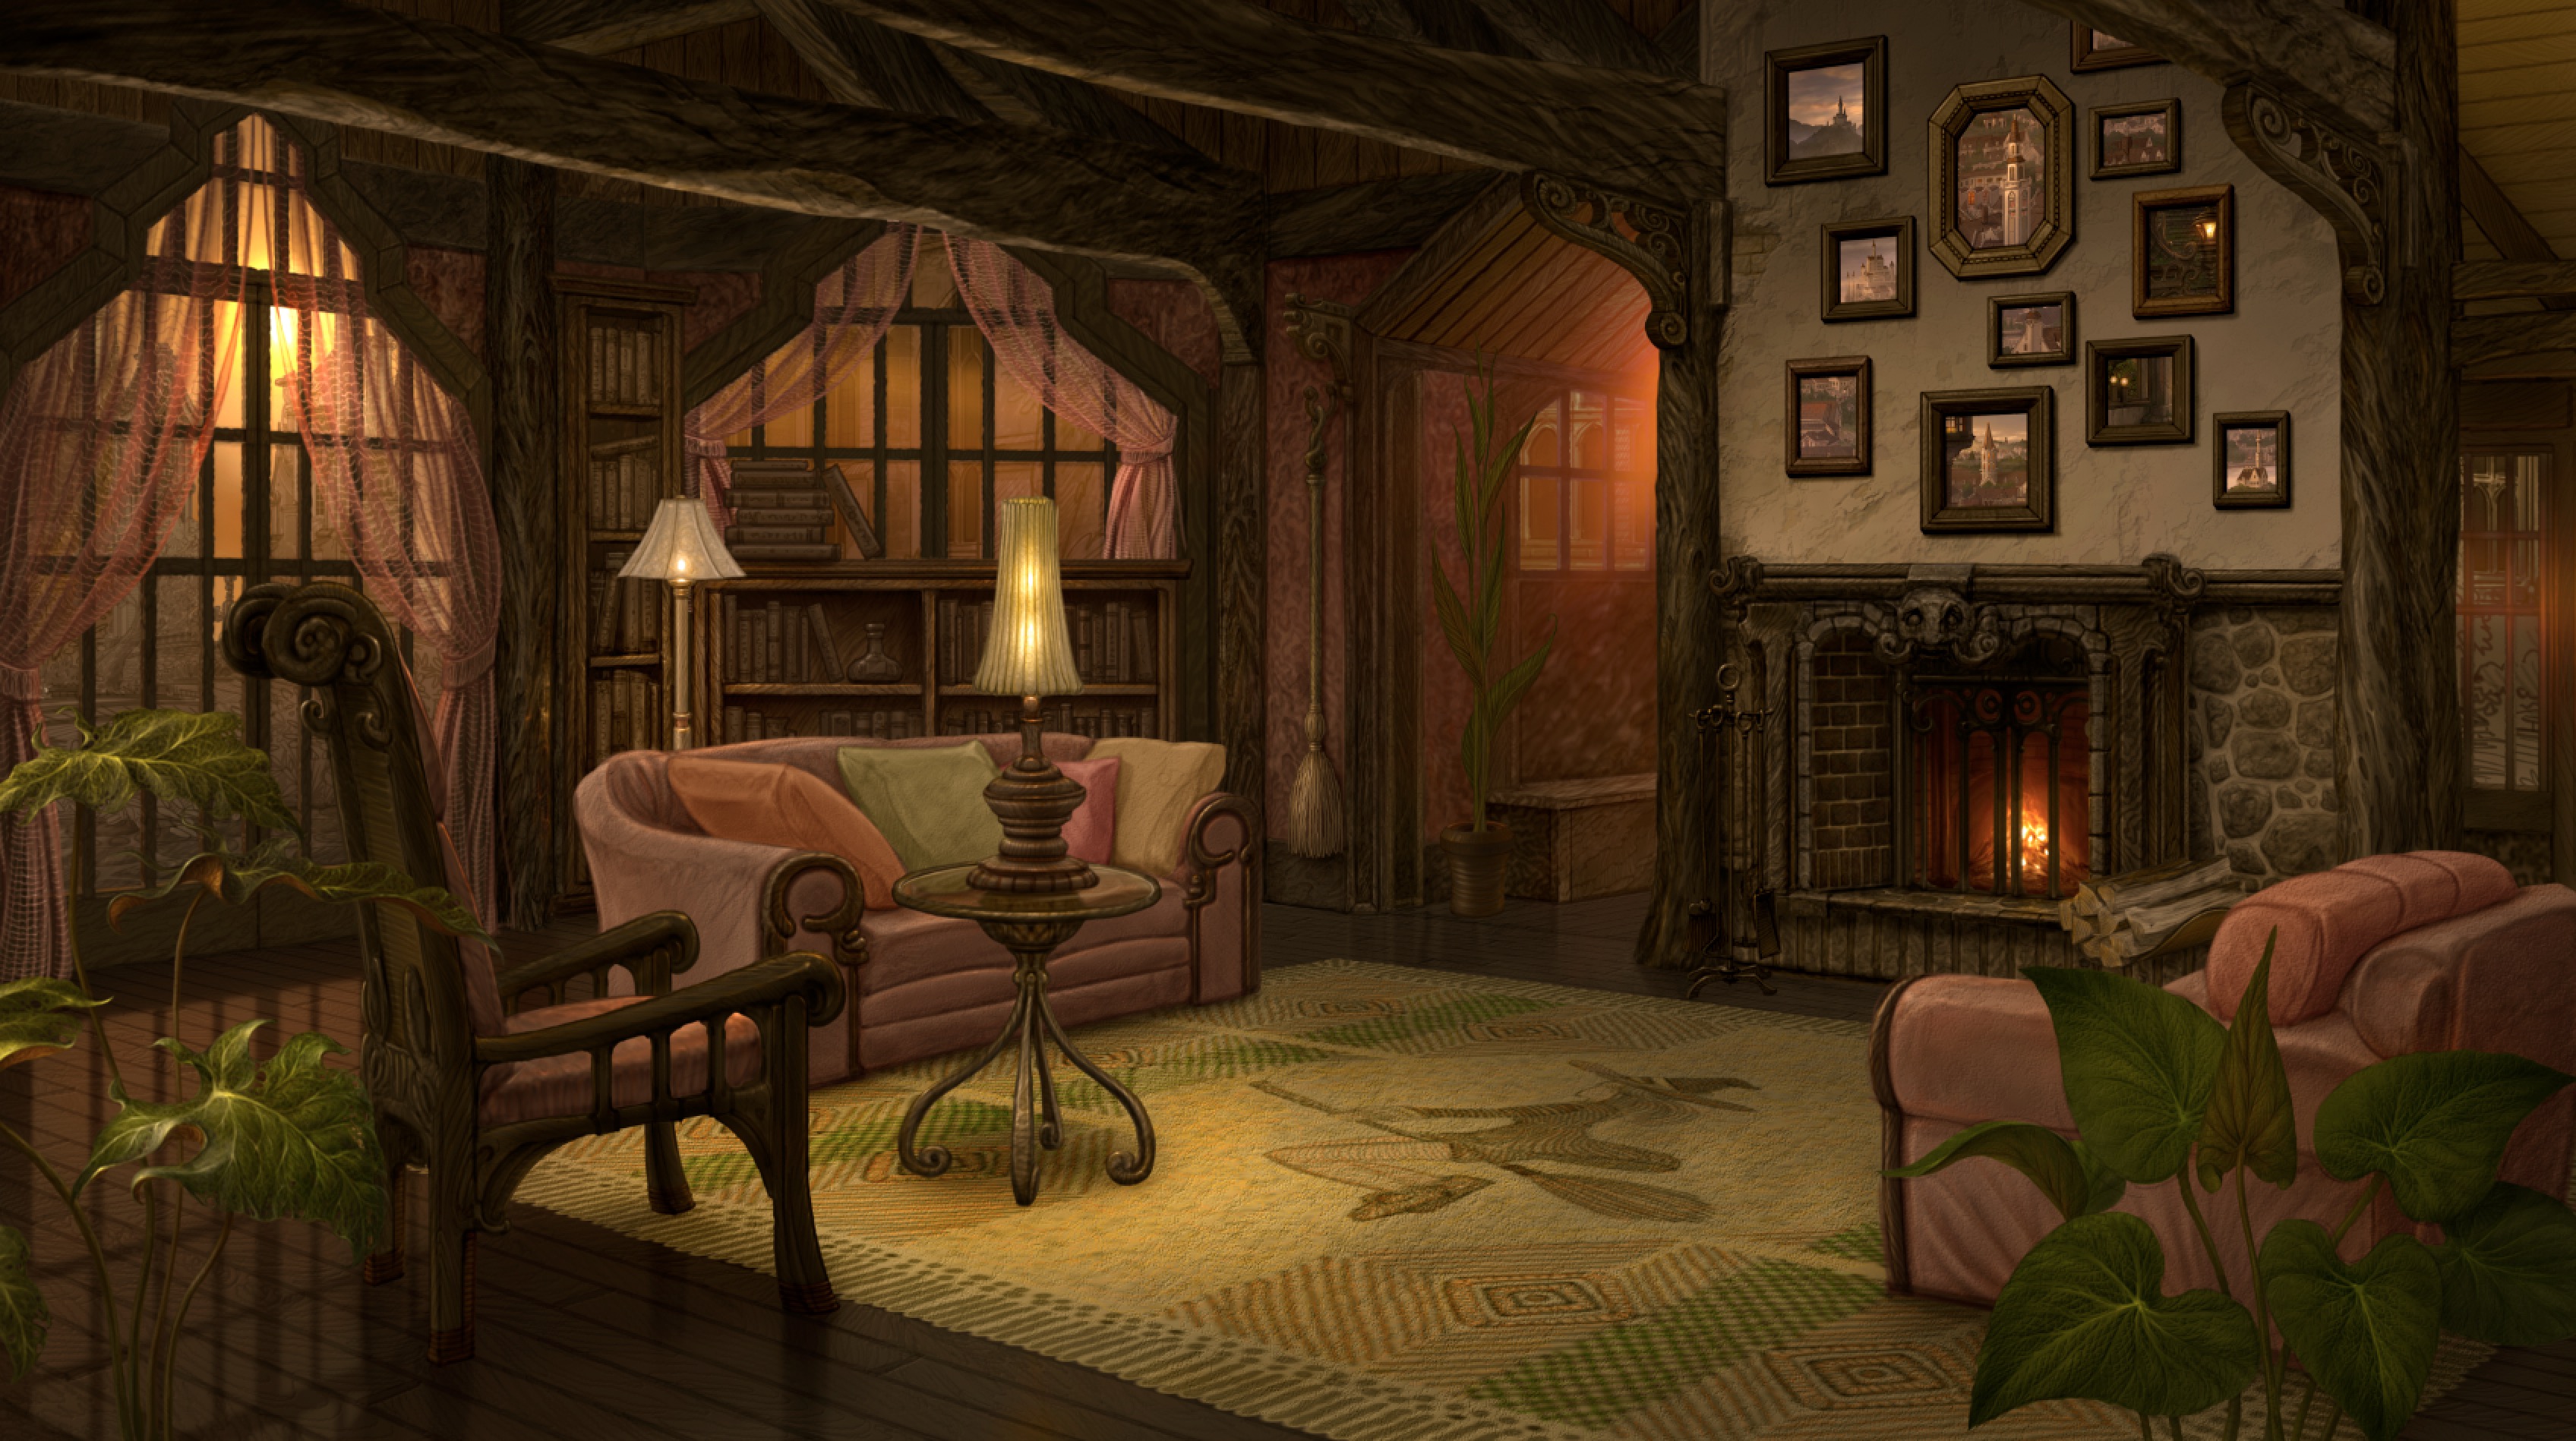 Fantasy Room HD Wallpaper By Ucchiey